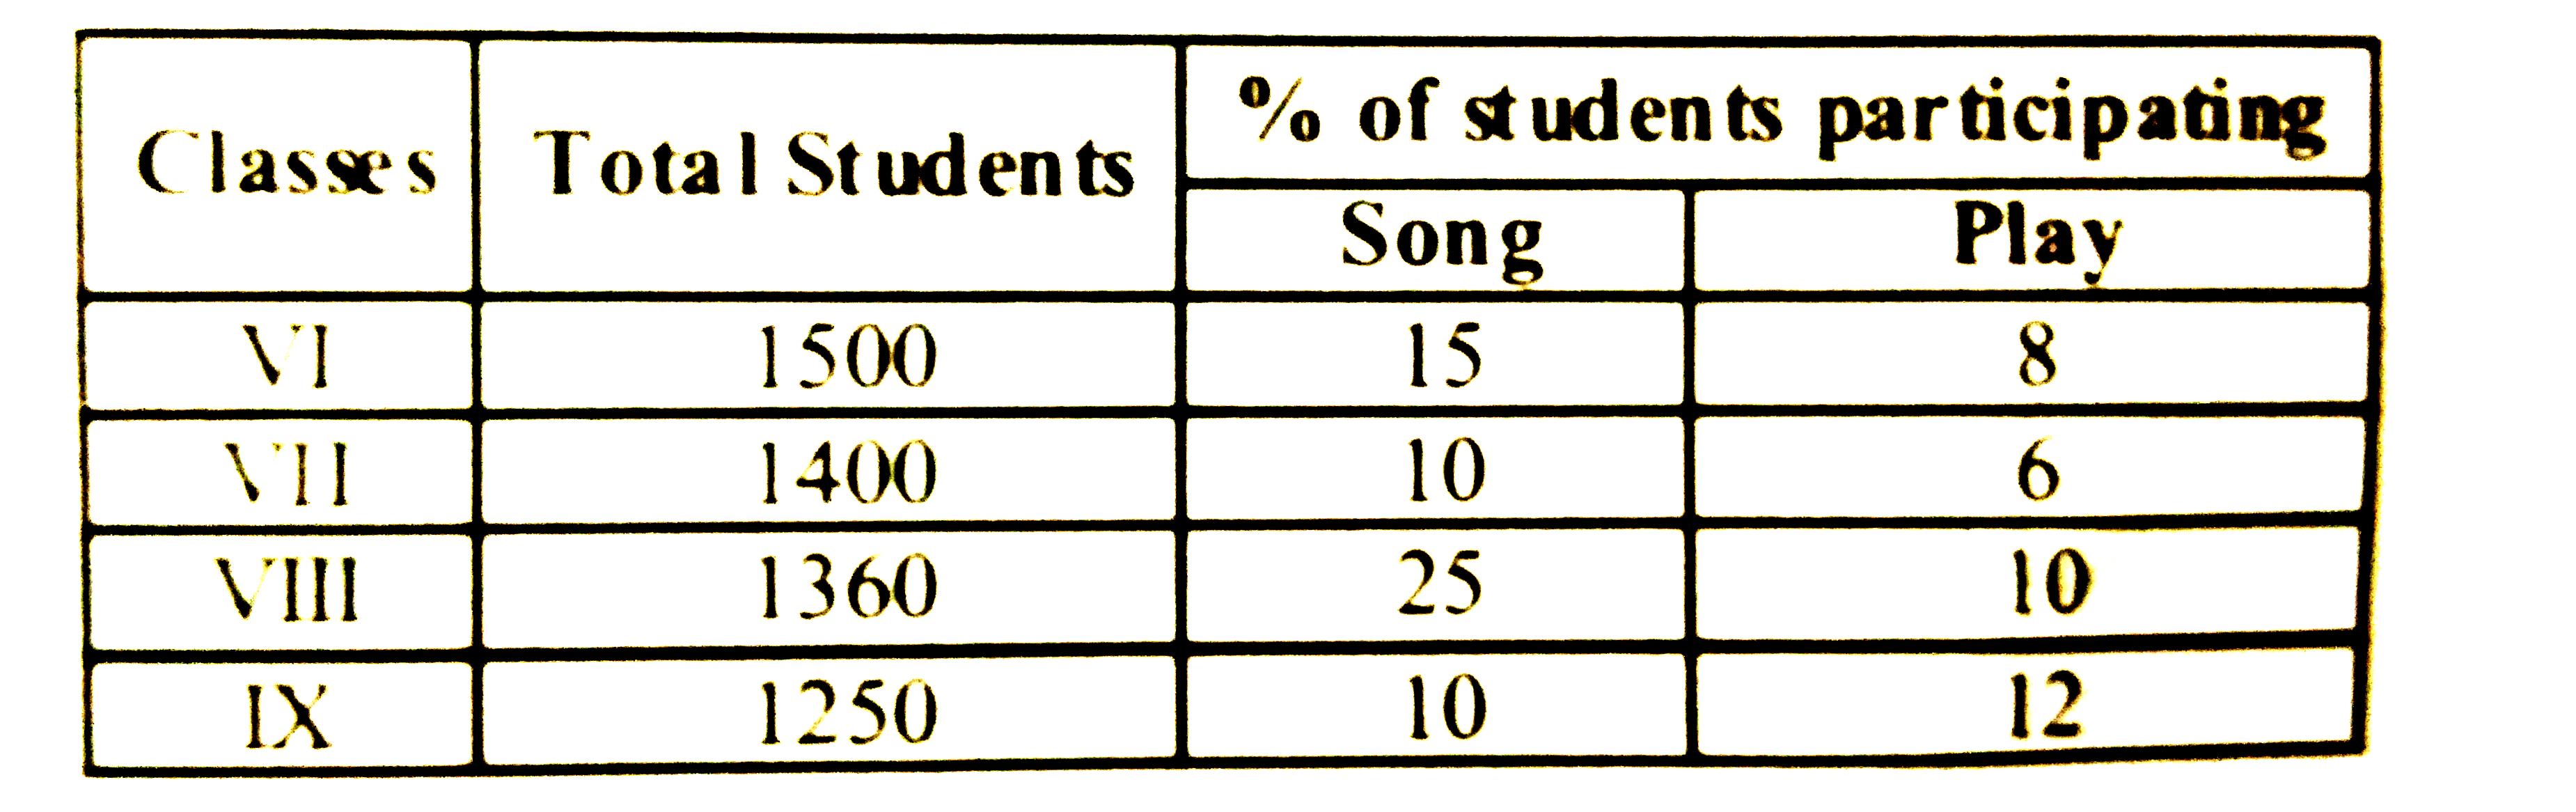 Students who are participating in Songs from class VIII are what percent more or less than students who are participating is play from class IX.